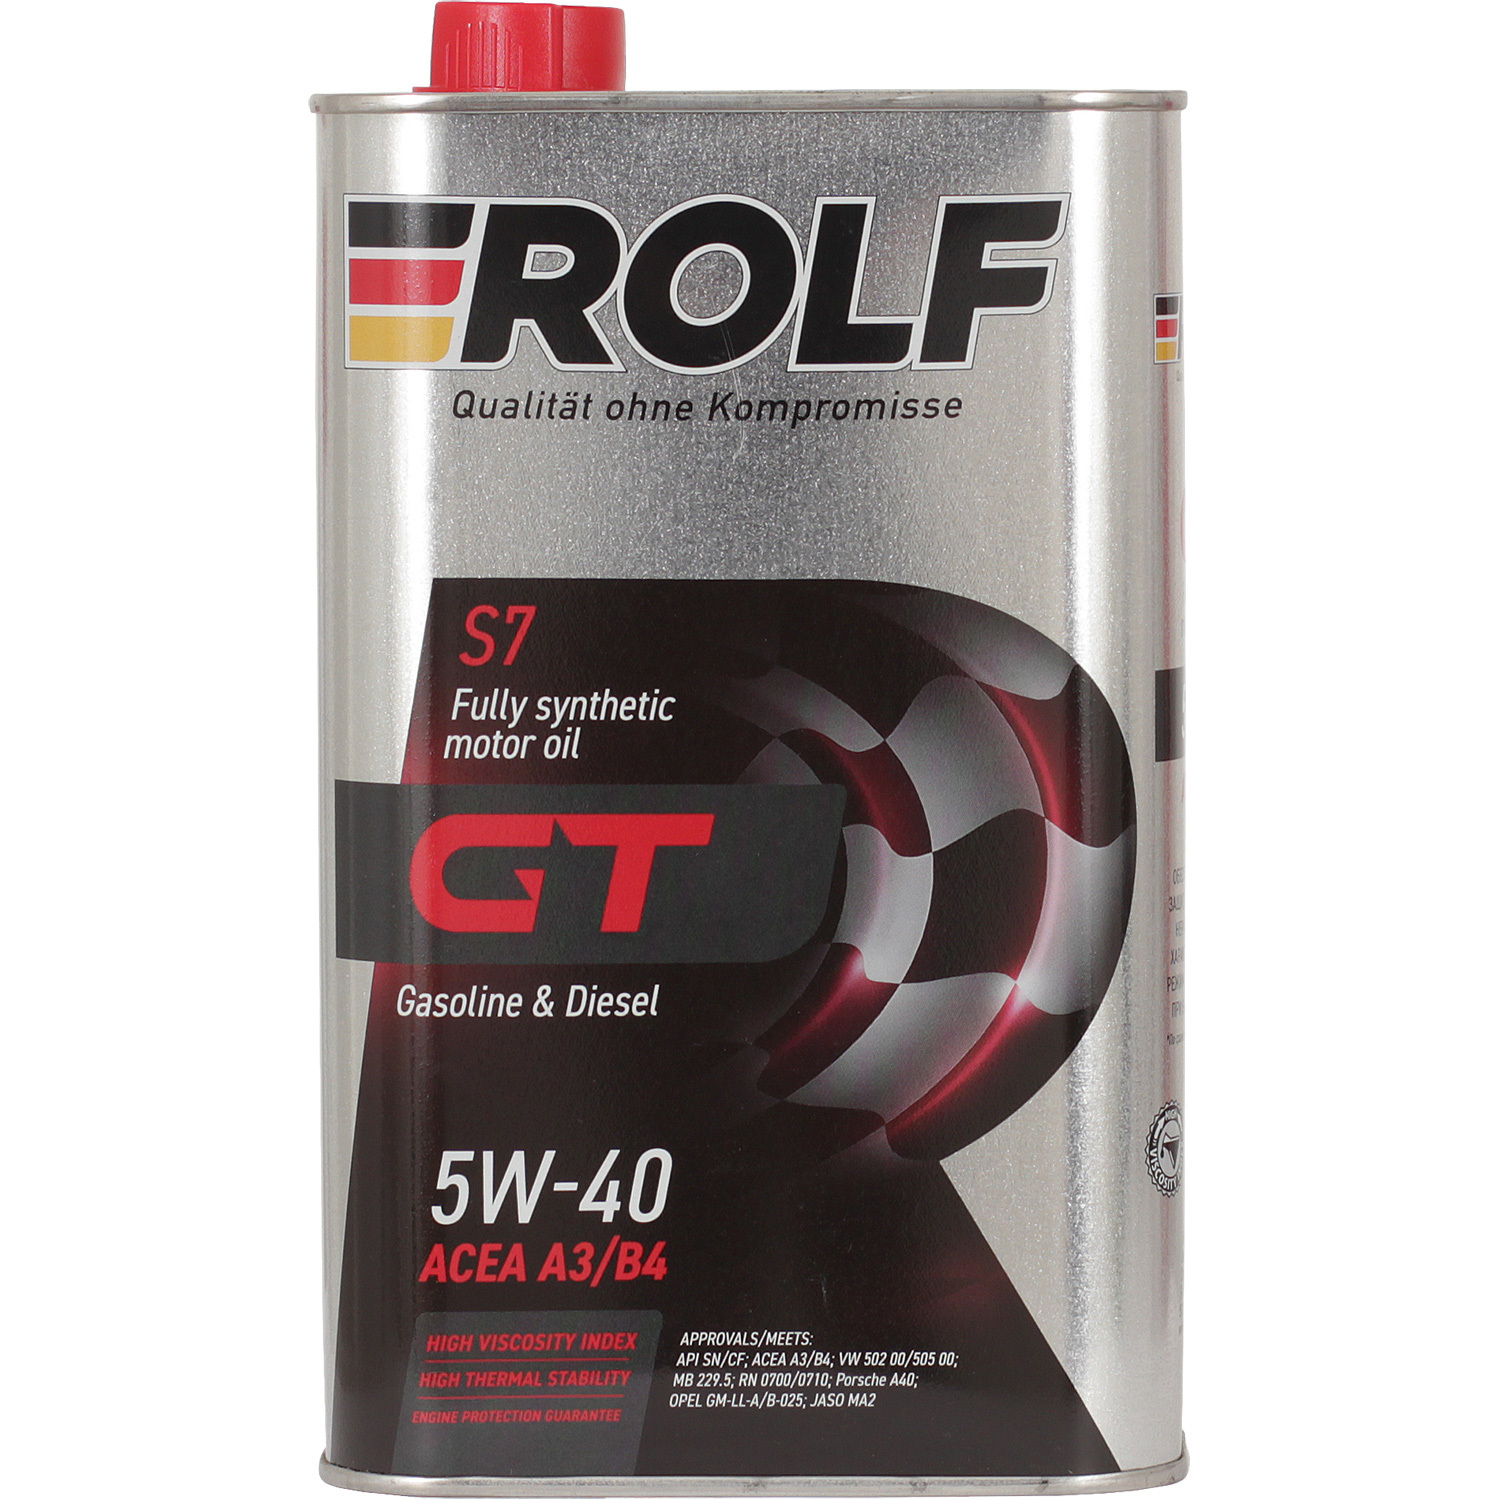 Rolf Моторное масло Rolf GT 5W-40, 1 л